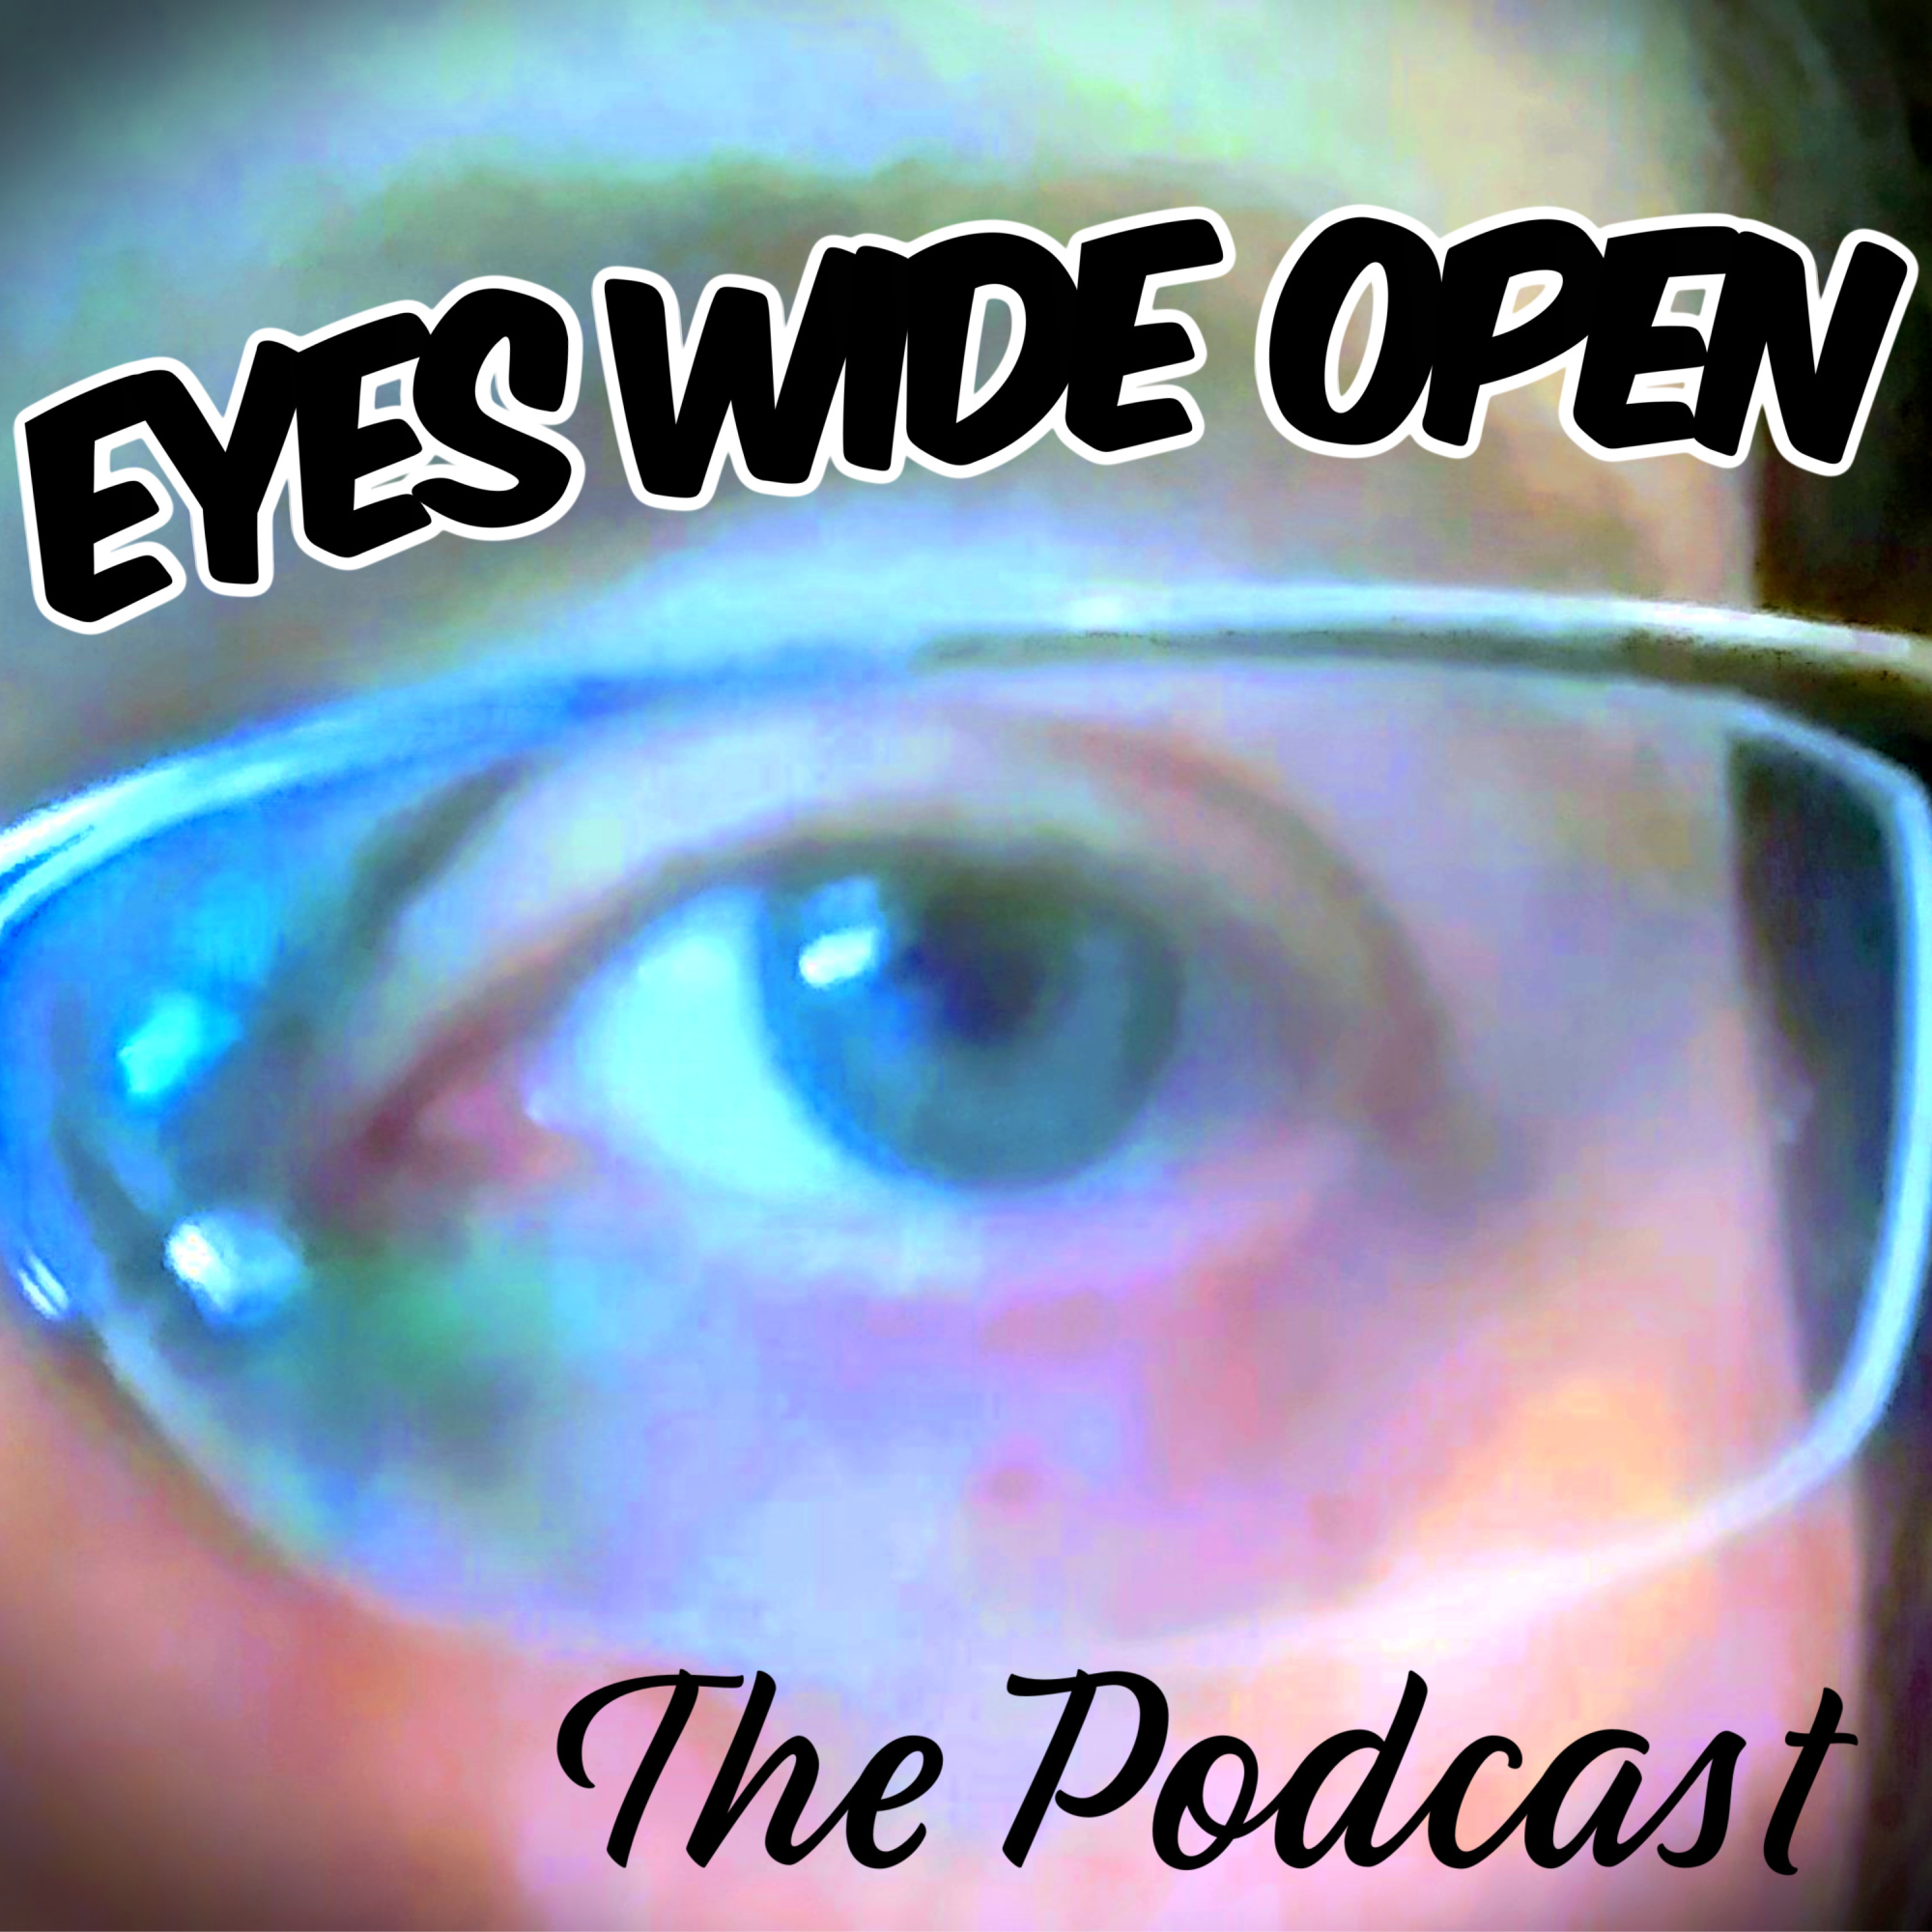 EYES WIDE OPEN, The Podcast [SEASON 1]